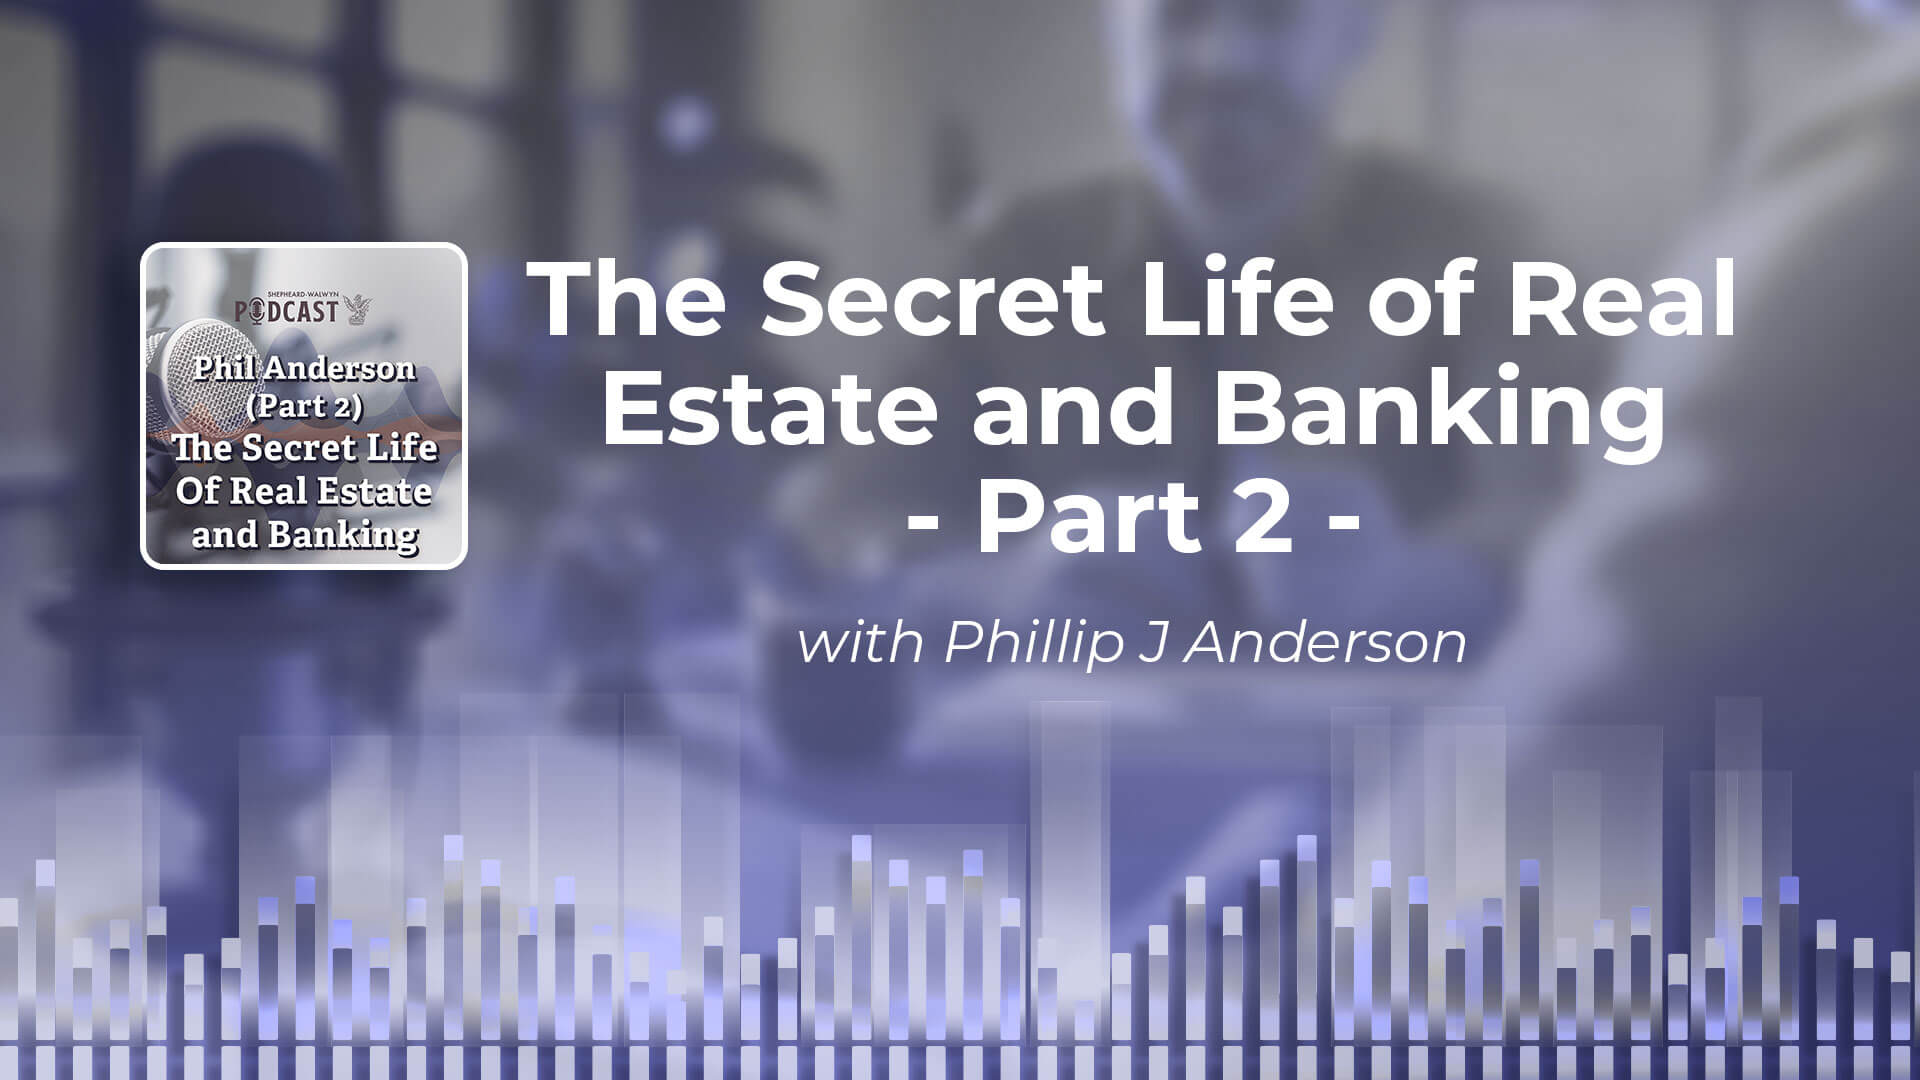 Secret Life of Banking and Real Estate - Shepheard Walwyn Podcast - Part 2